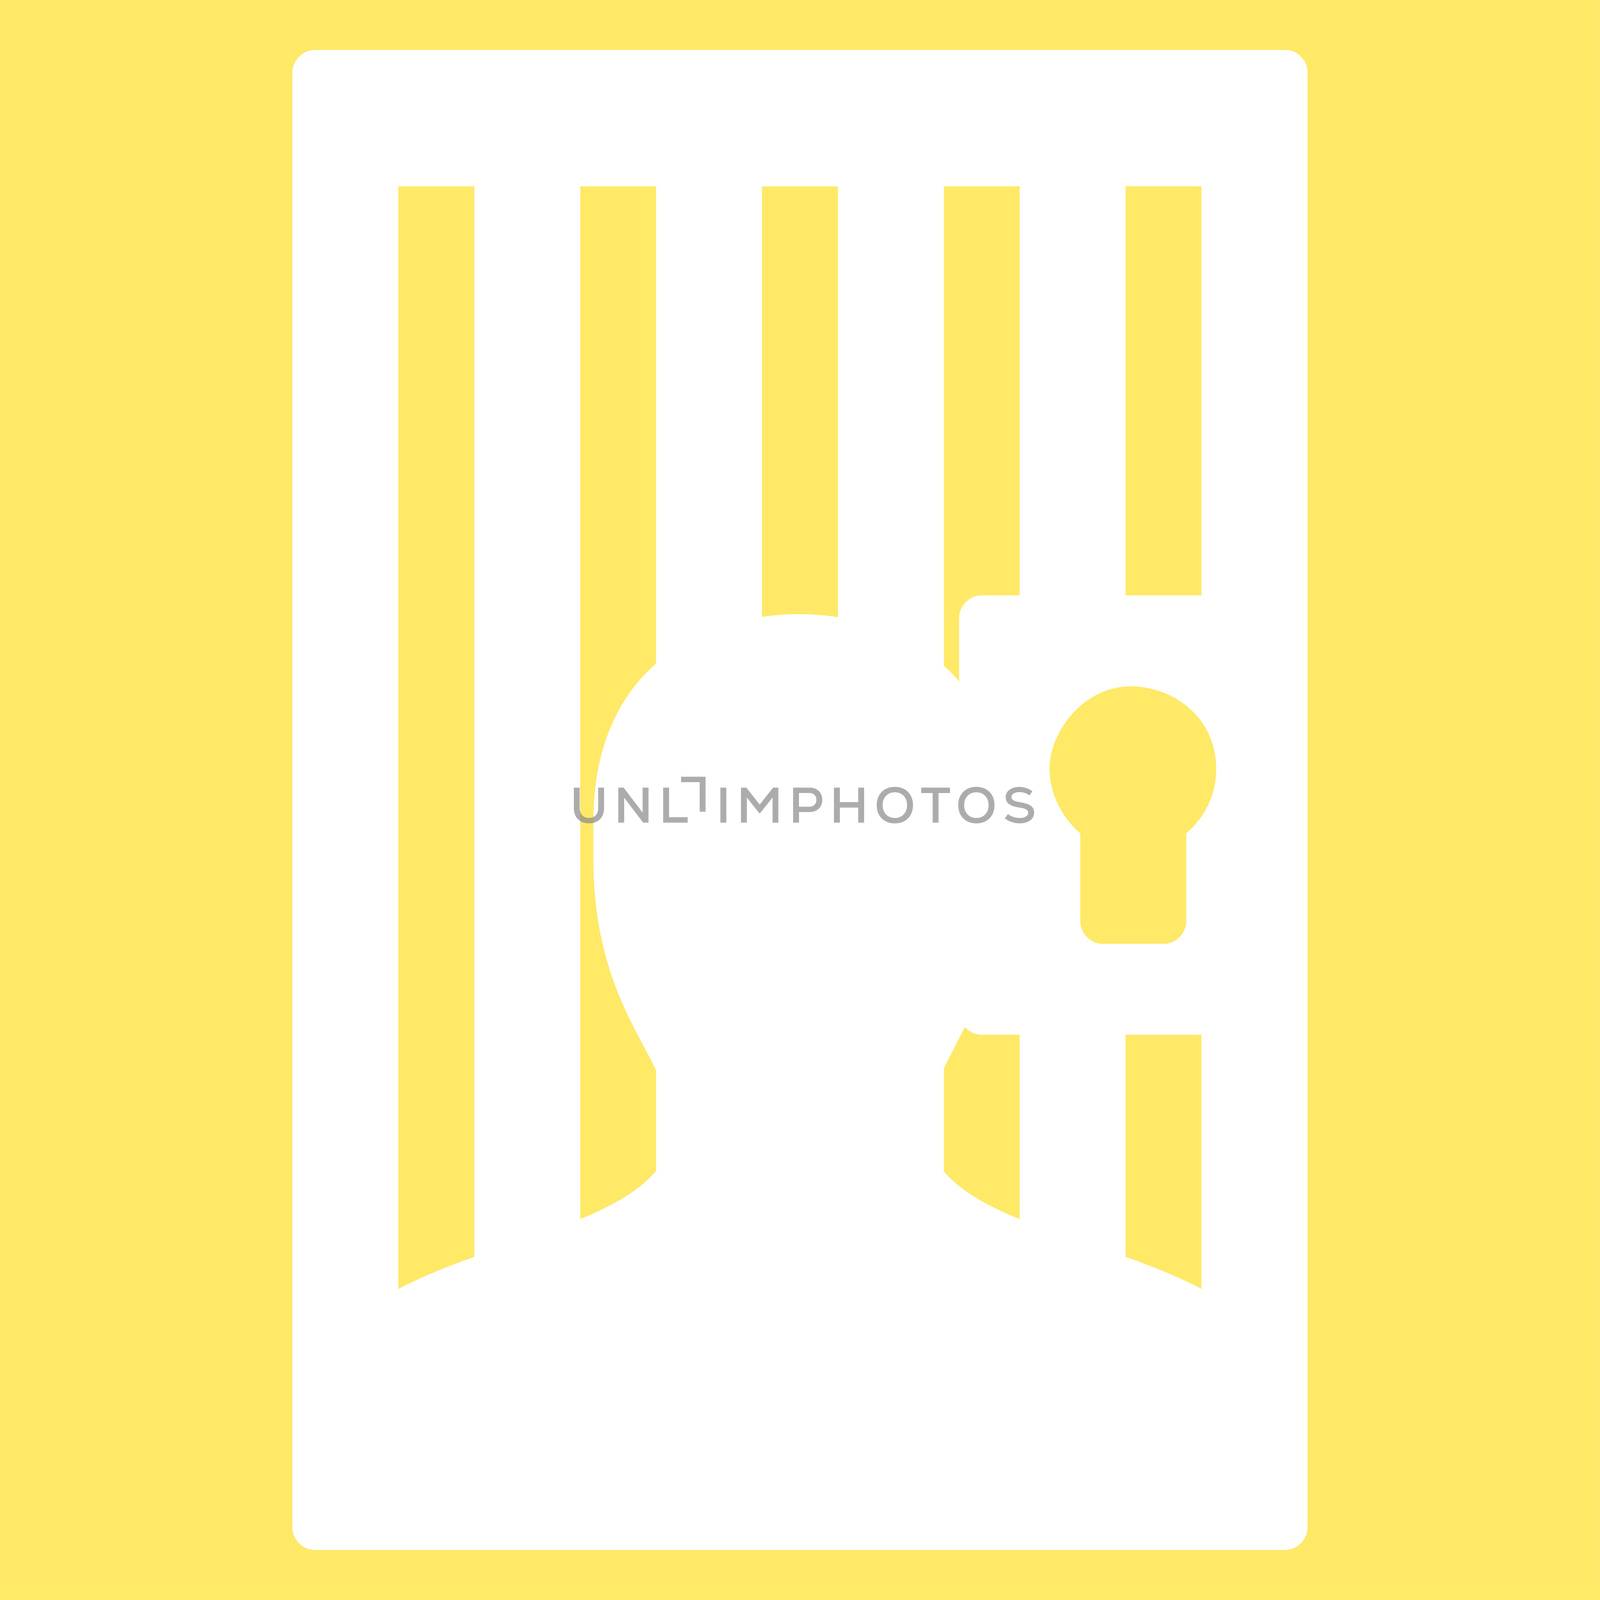 Prison icon from Business Bicolor Set. Glyph style is flat symbol, white color, rounded angles, yellow background.